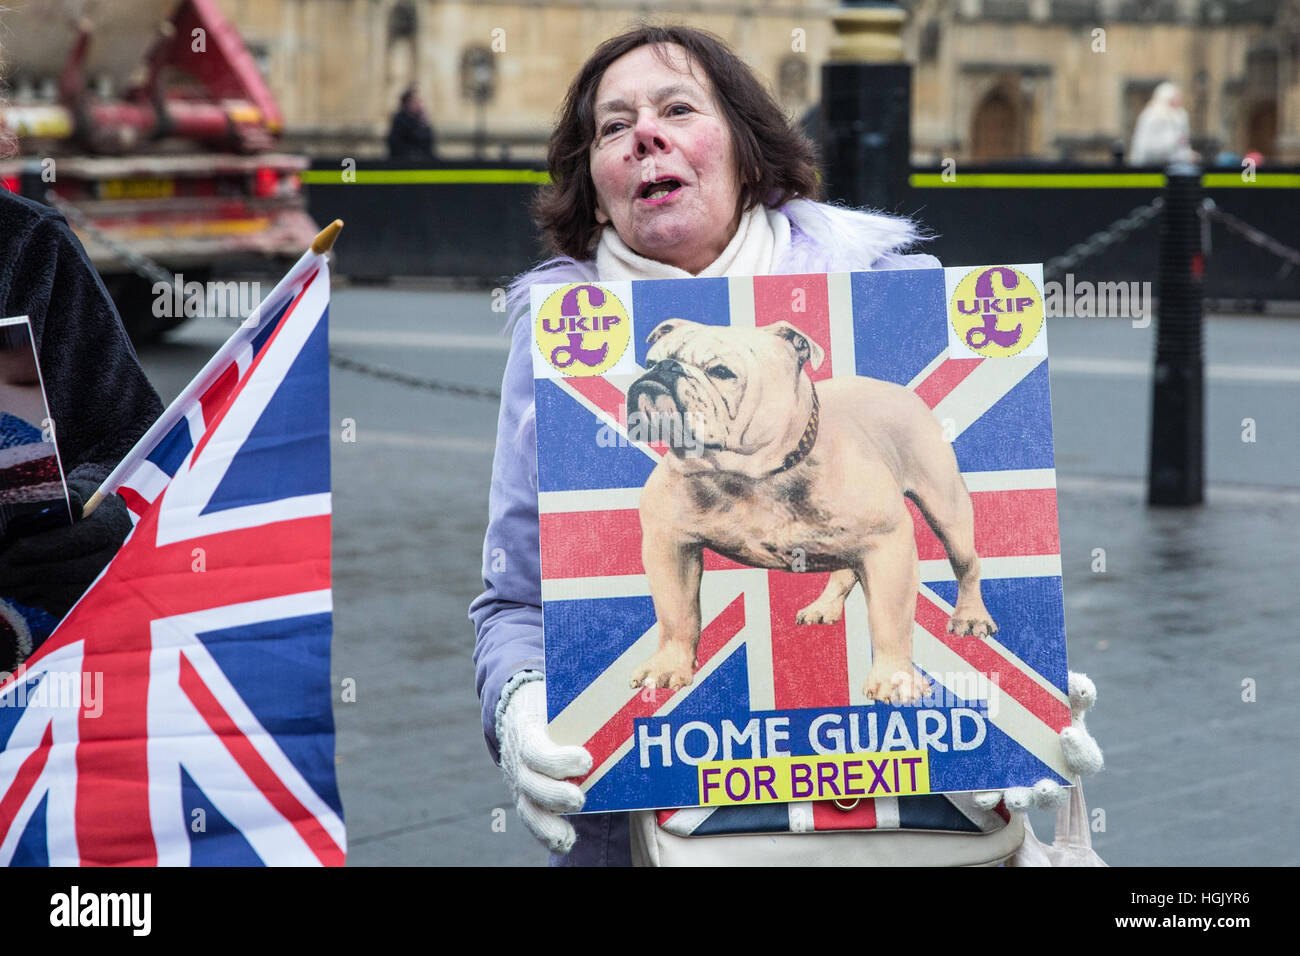 London, UK. 23rd January, 2017. Pro-Brexit campaigners attend a 'Brexit Peaceful Loud and Proud' rally organised by UKIP outside Parliament. Campaigners intend to ensure that the EU Referendum vote is implemented. Credit: Mark Kerrison/Alamy Live News Stock Photo